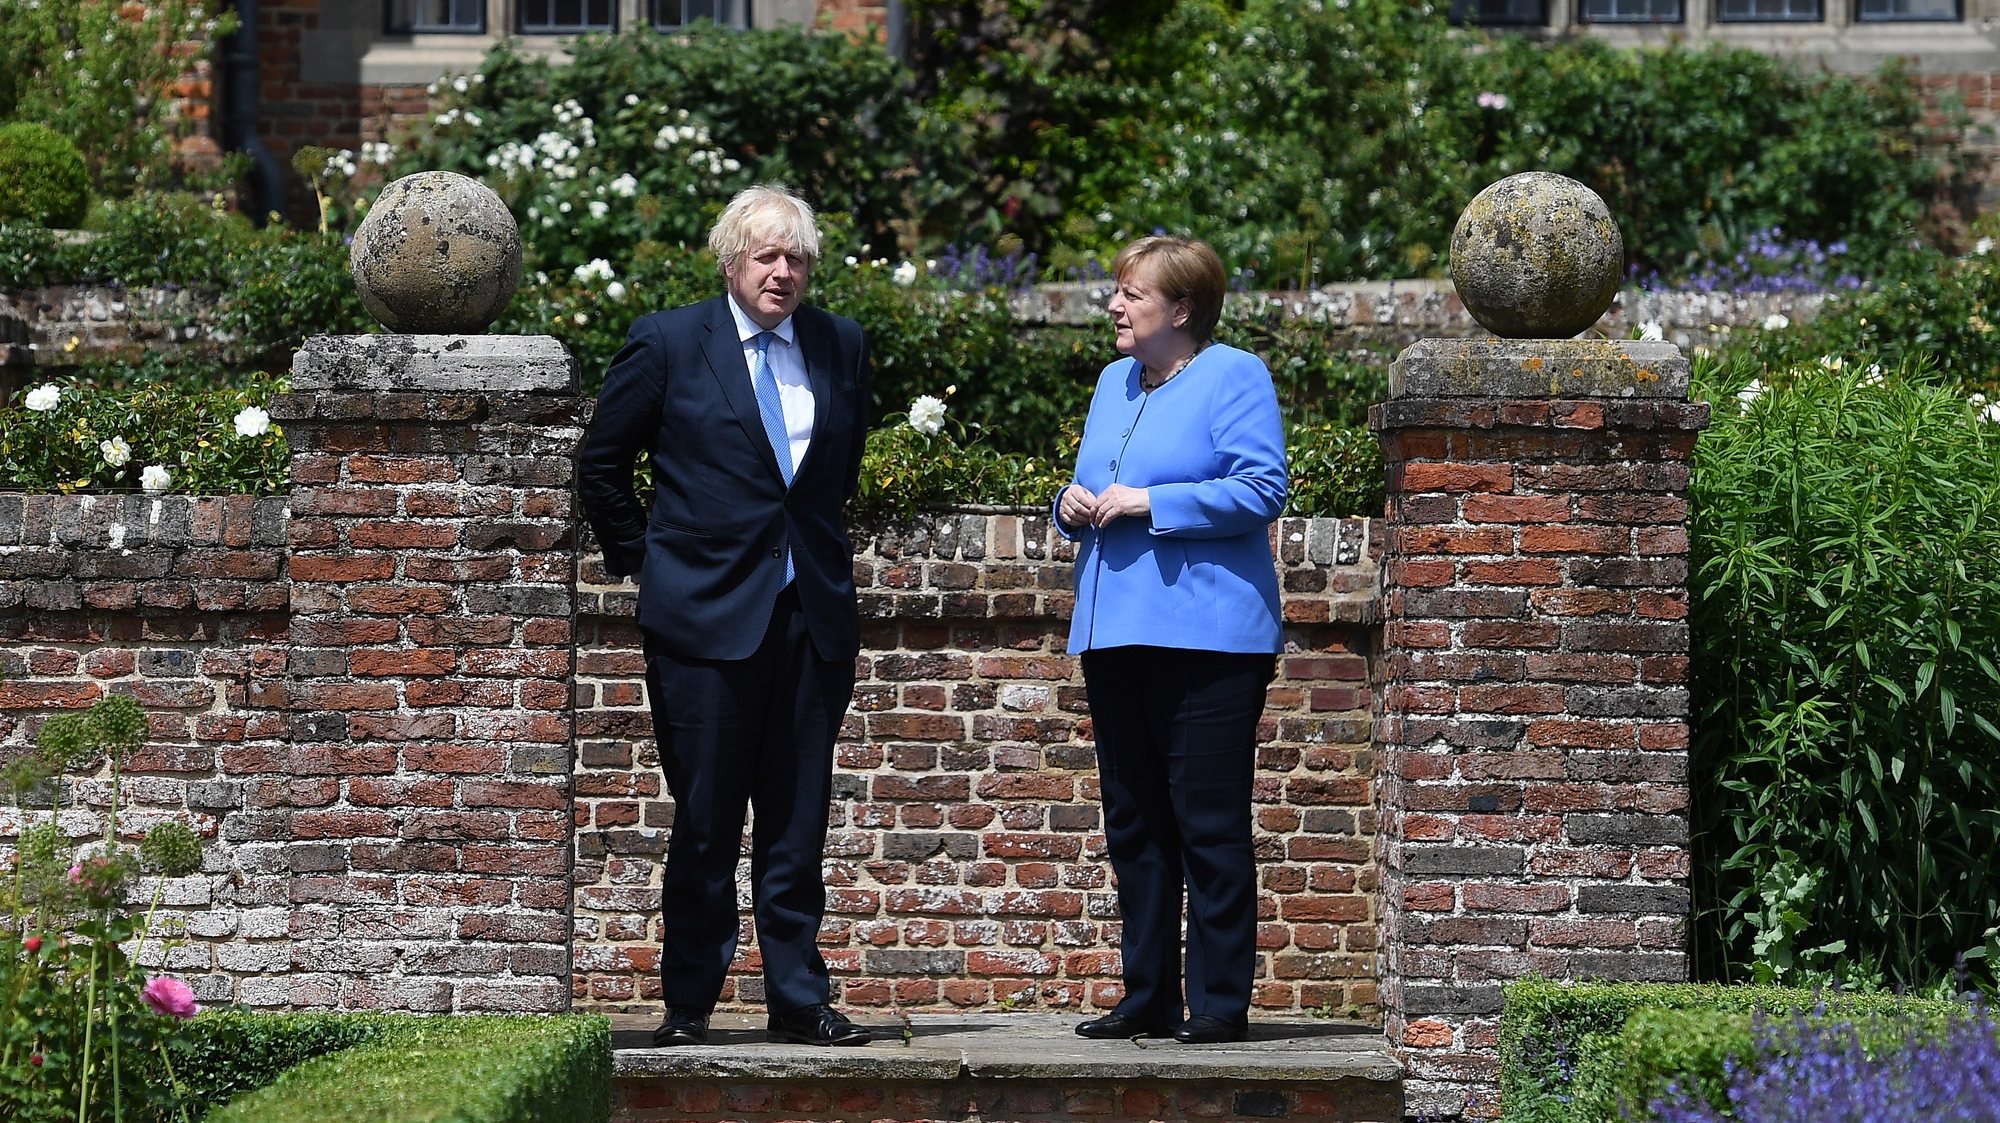 epa09317444 British Prime Minister Boris Johnson (L) with German Chancellor Angela Merkel (R) in the rose garden at the Prime Minister&#039;s country residence at Chequers, Buckinghamshire, Britain, 02 July 2021. The two nations have agreed a post Brexit  joint declaration on foreign and security policy cooperation. The bilateral agreement is the first to be struck between London and Berlin on foreign and security policy issues.  EPA/ANDY RAIN / POOL Pool